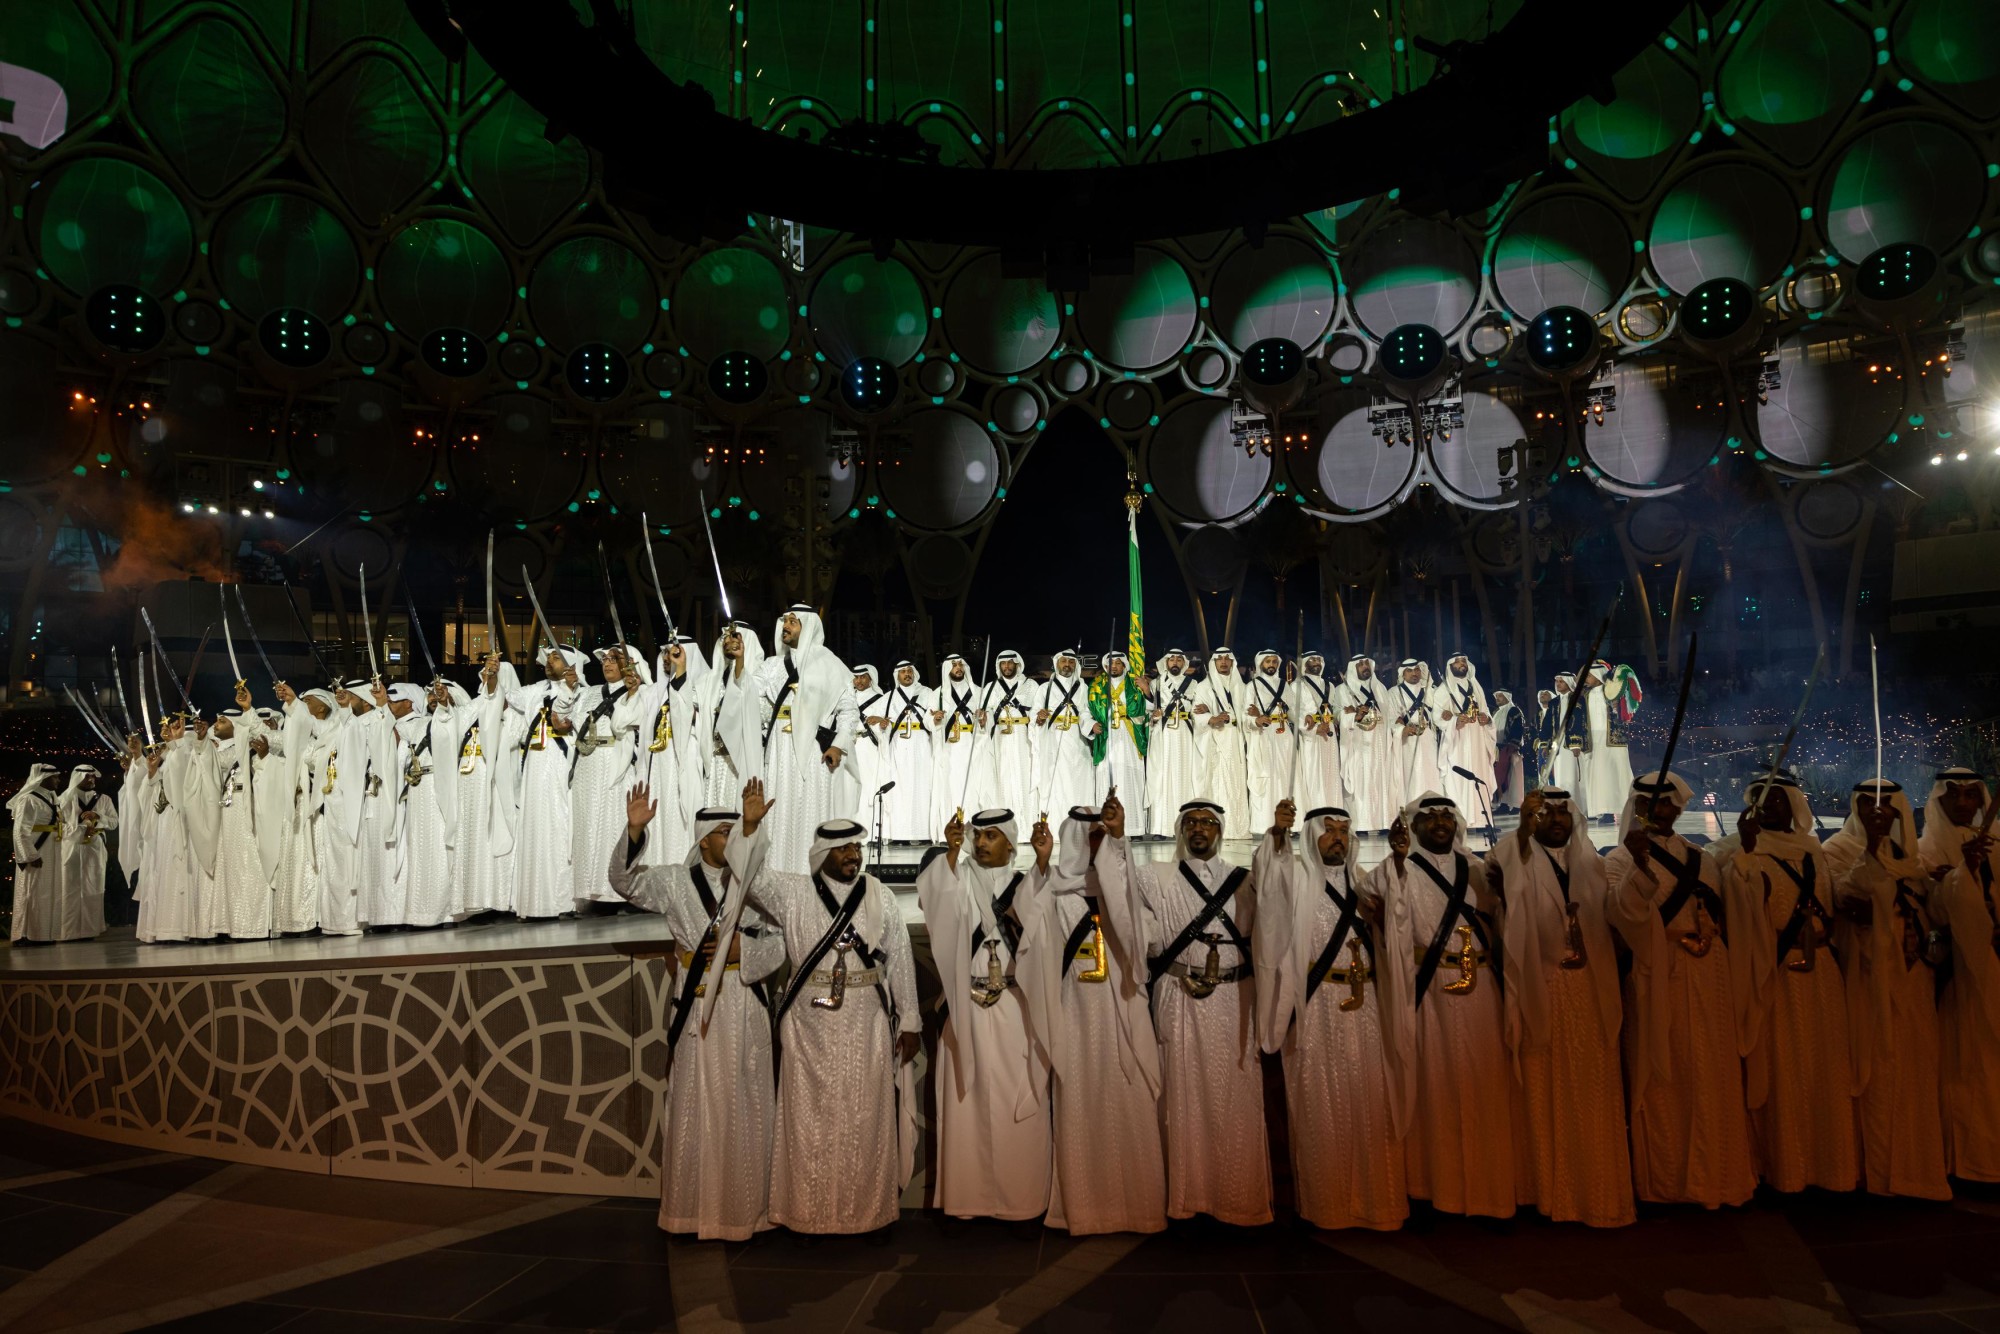 The Glory Musical Show at Al Wasl during the Kingdom of Saudi Arabia National Day m30468